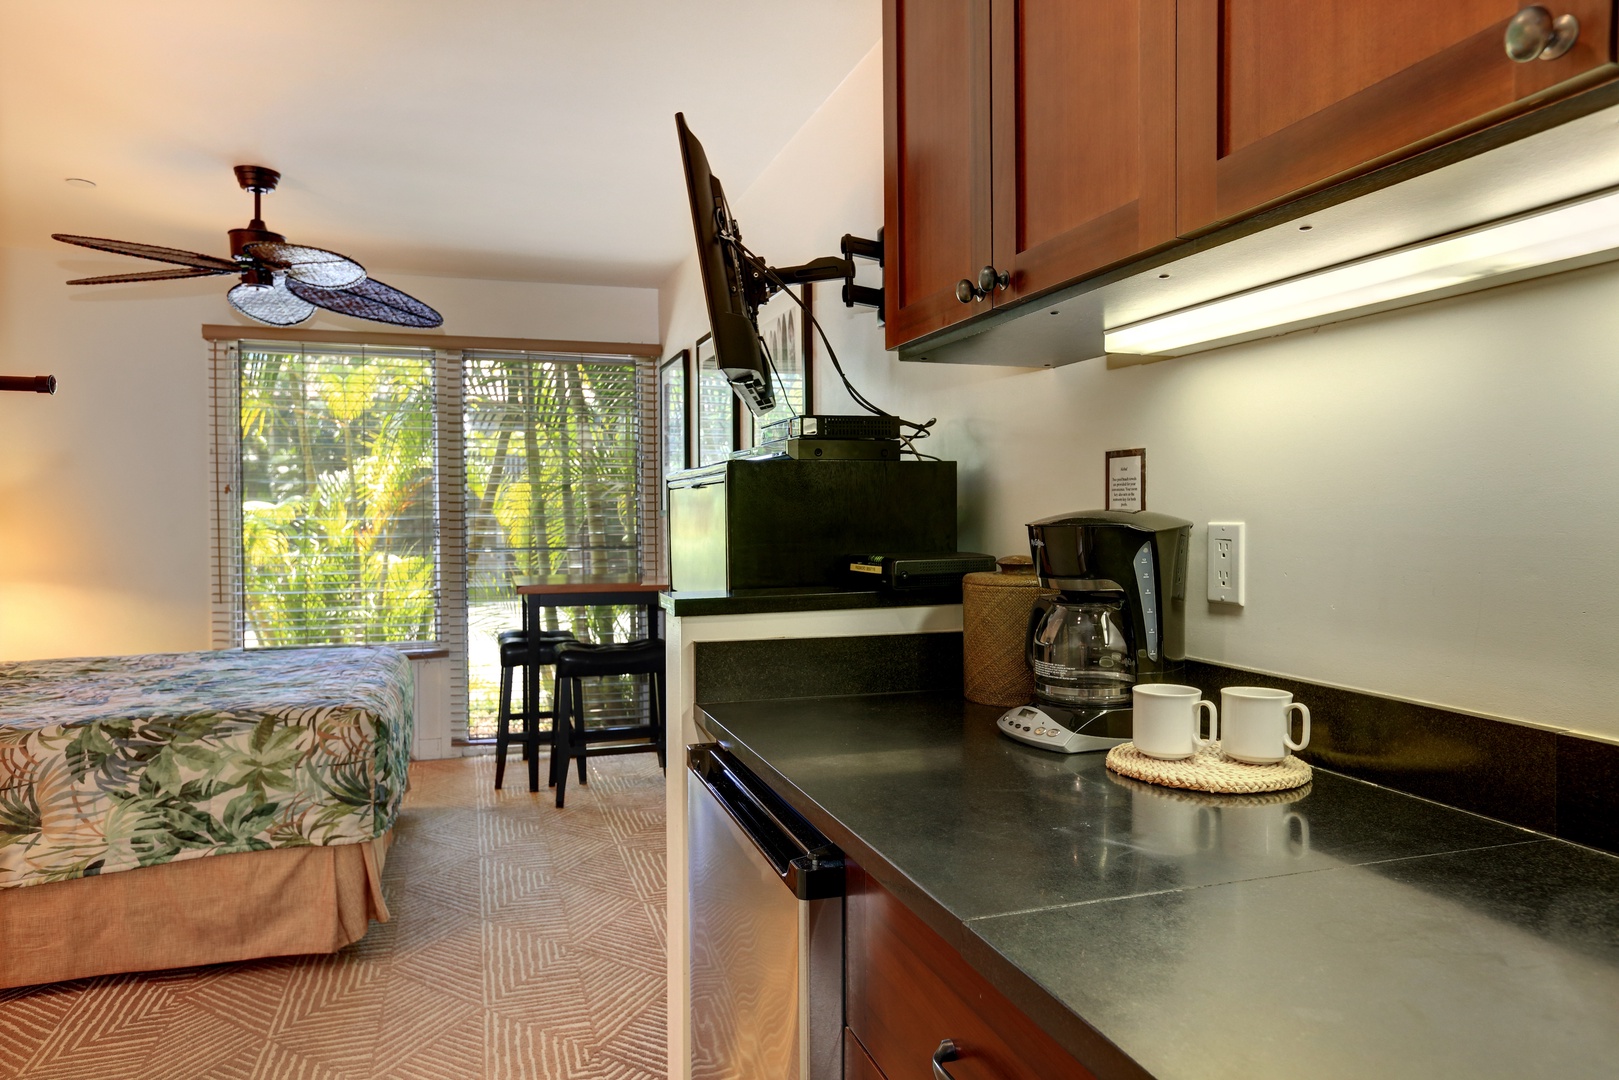 Lahaina Vacation Rentals, Aina Nalu B106 Studio - Extremely Rare Unit - The kitchenette also comes equipped with all the silverware, plates, and glasses you'll need.